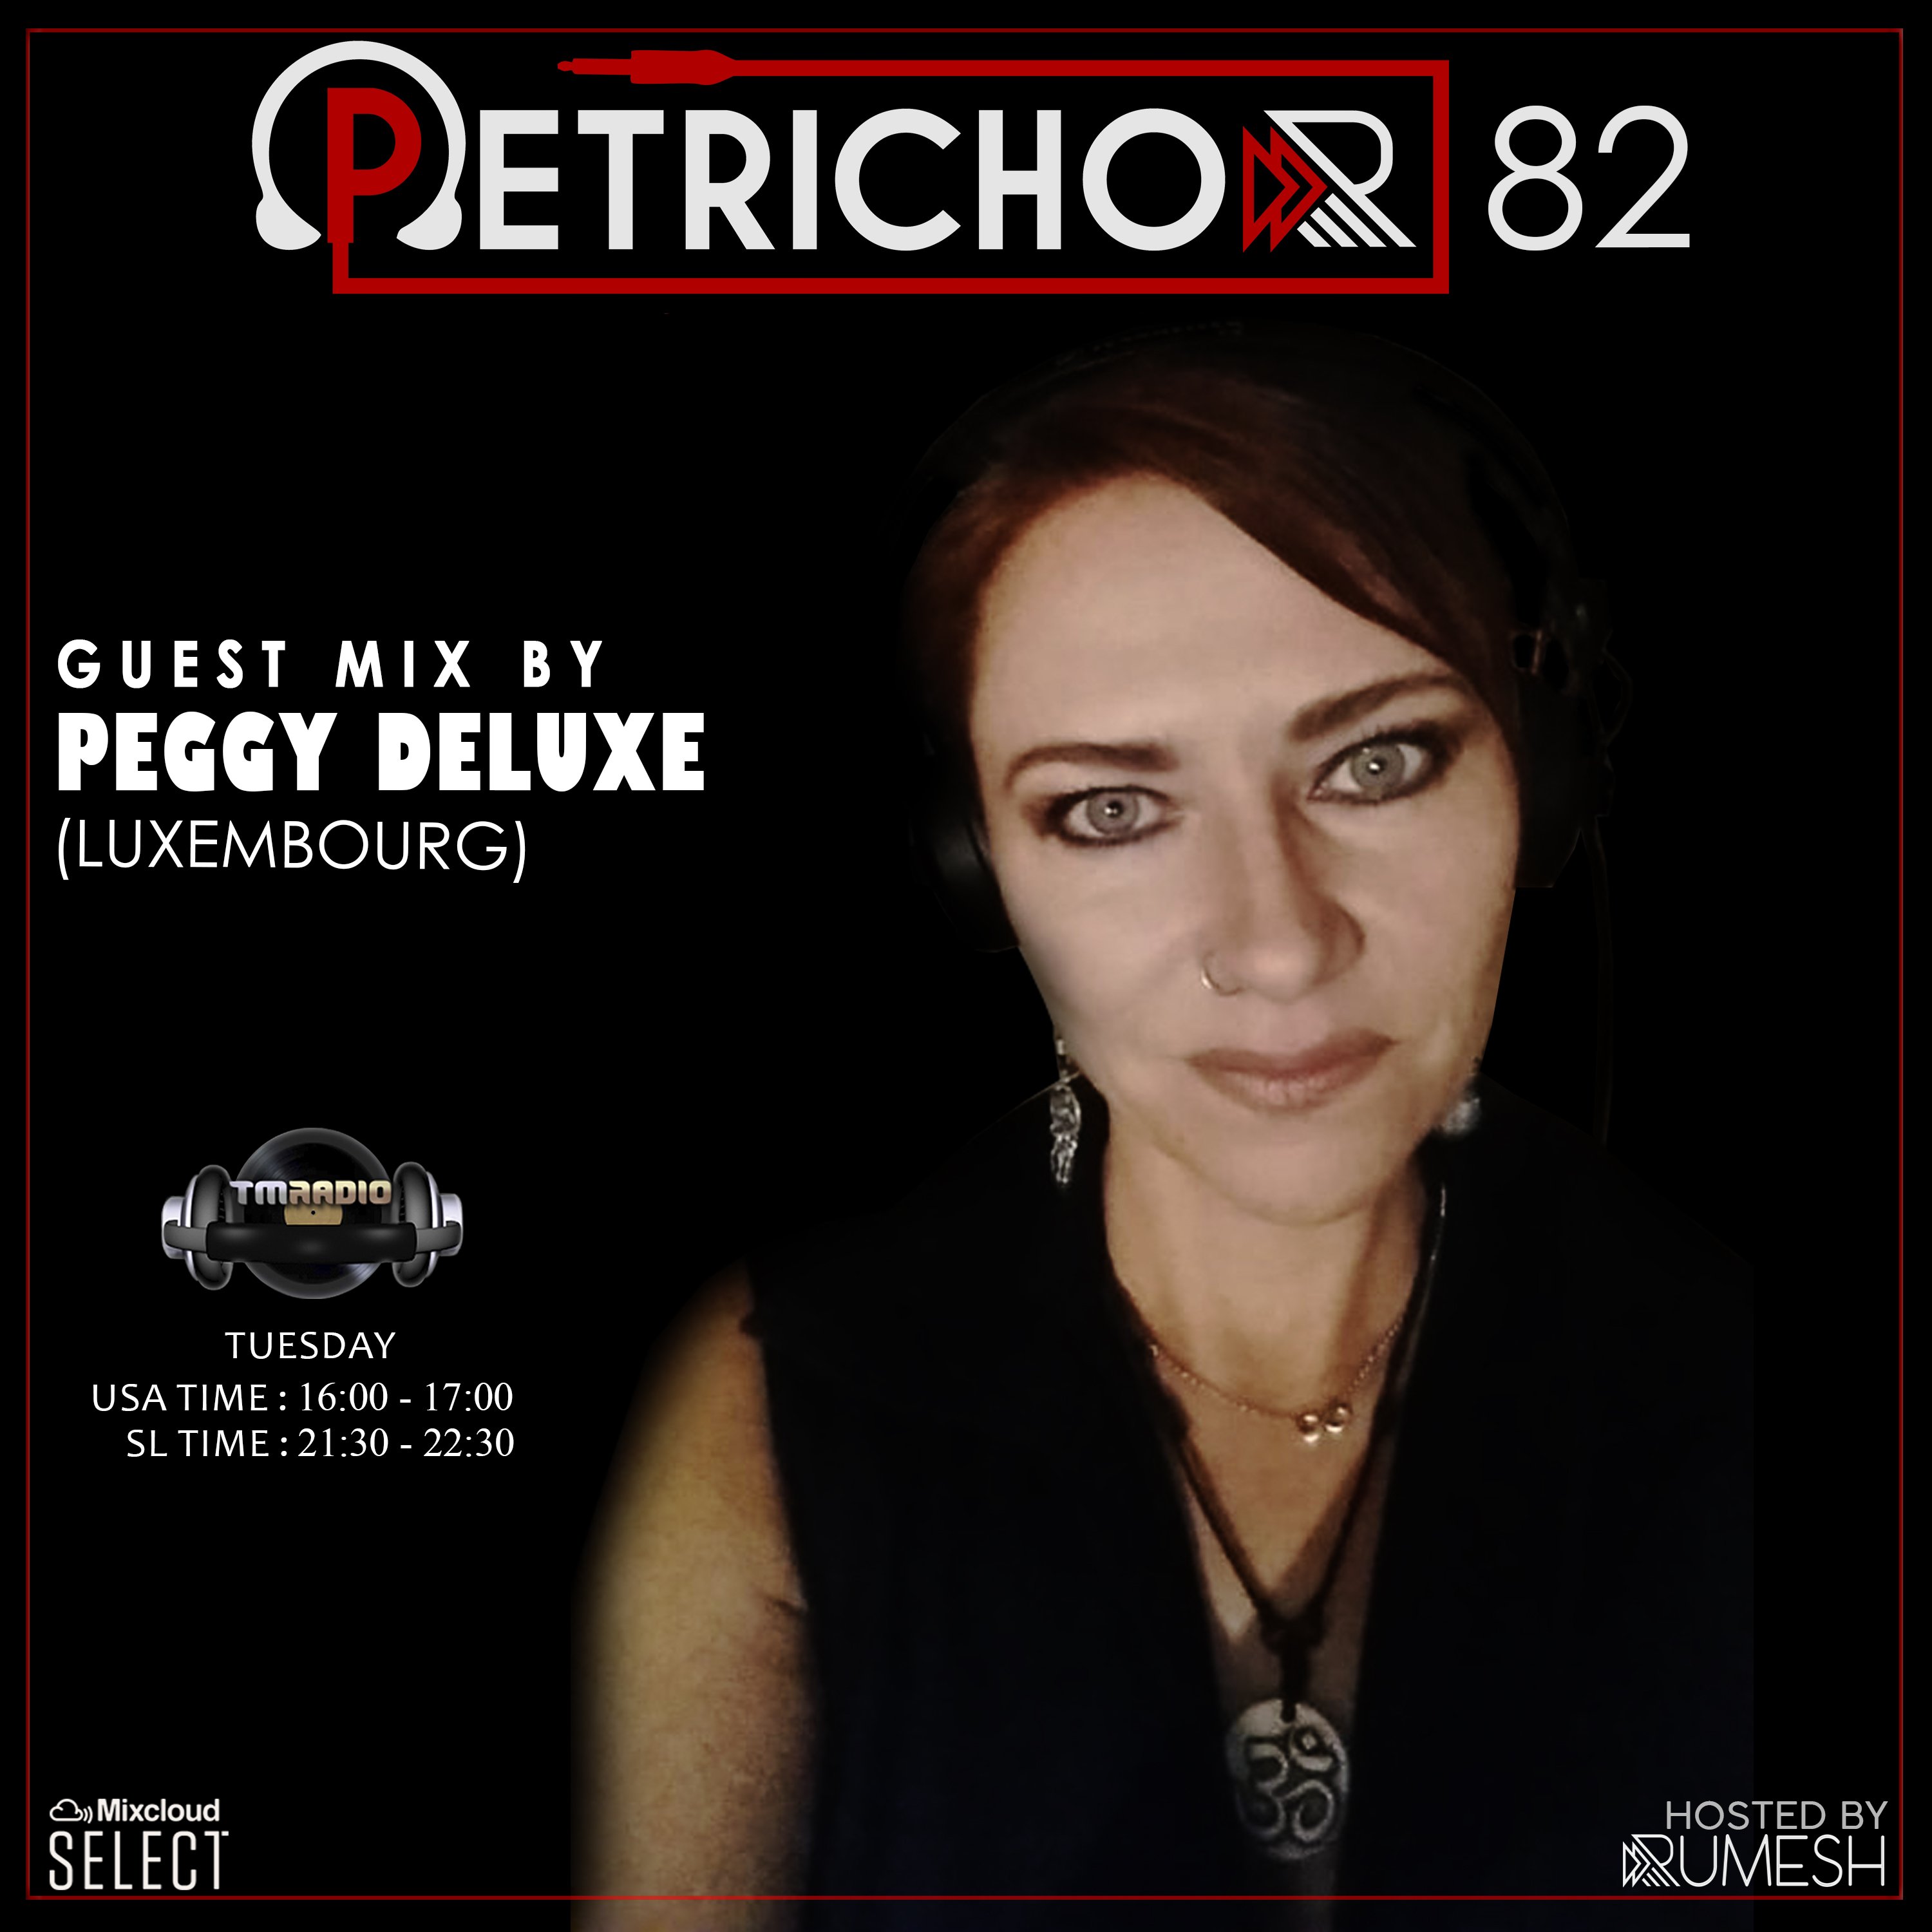 Petrichor 82 guest mix by Peggy Deluxe (Luxembourg) (from June 2nd, 2020)